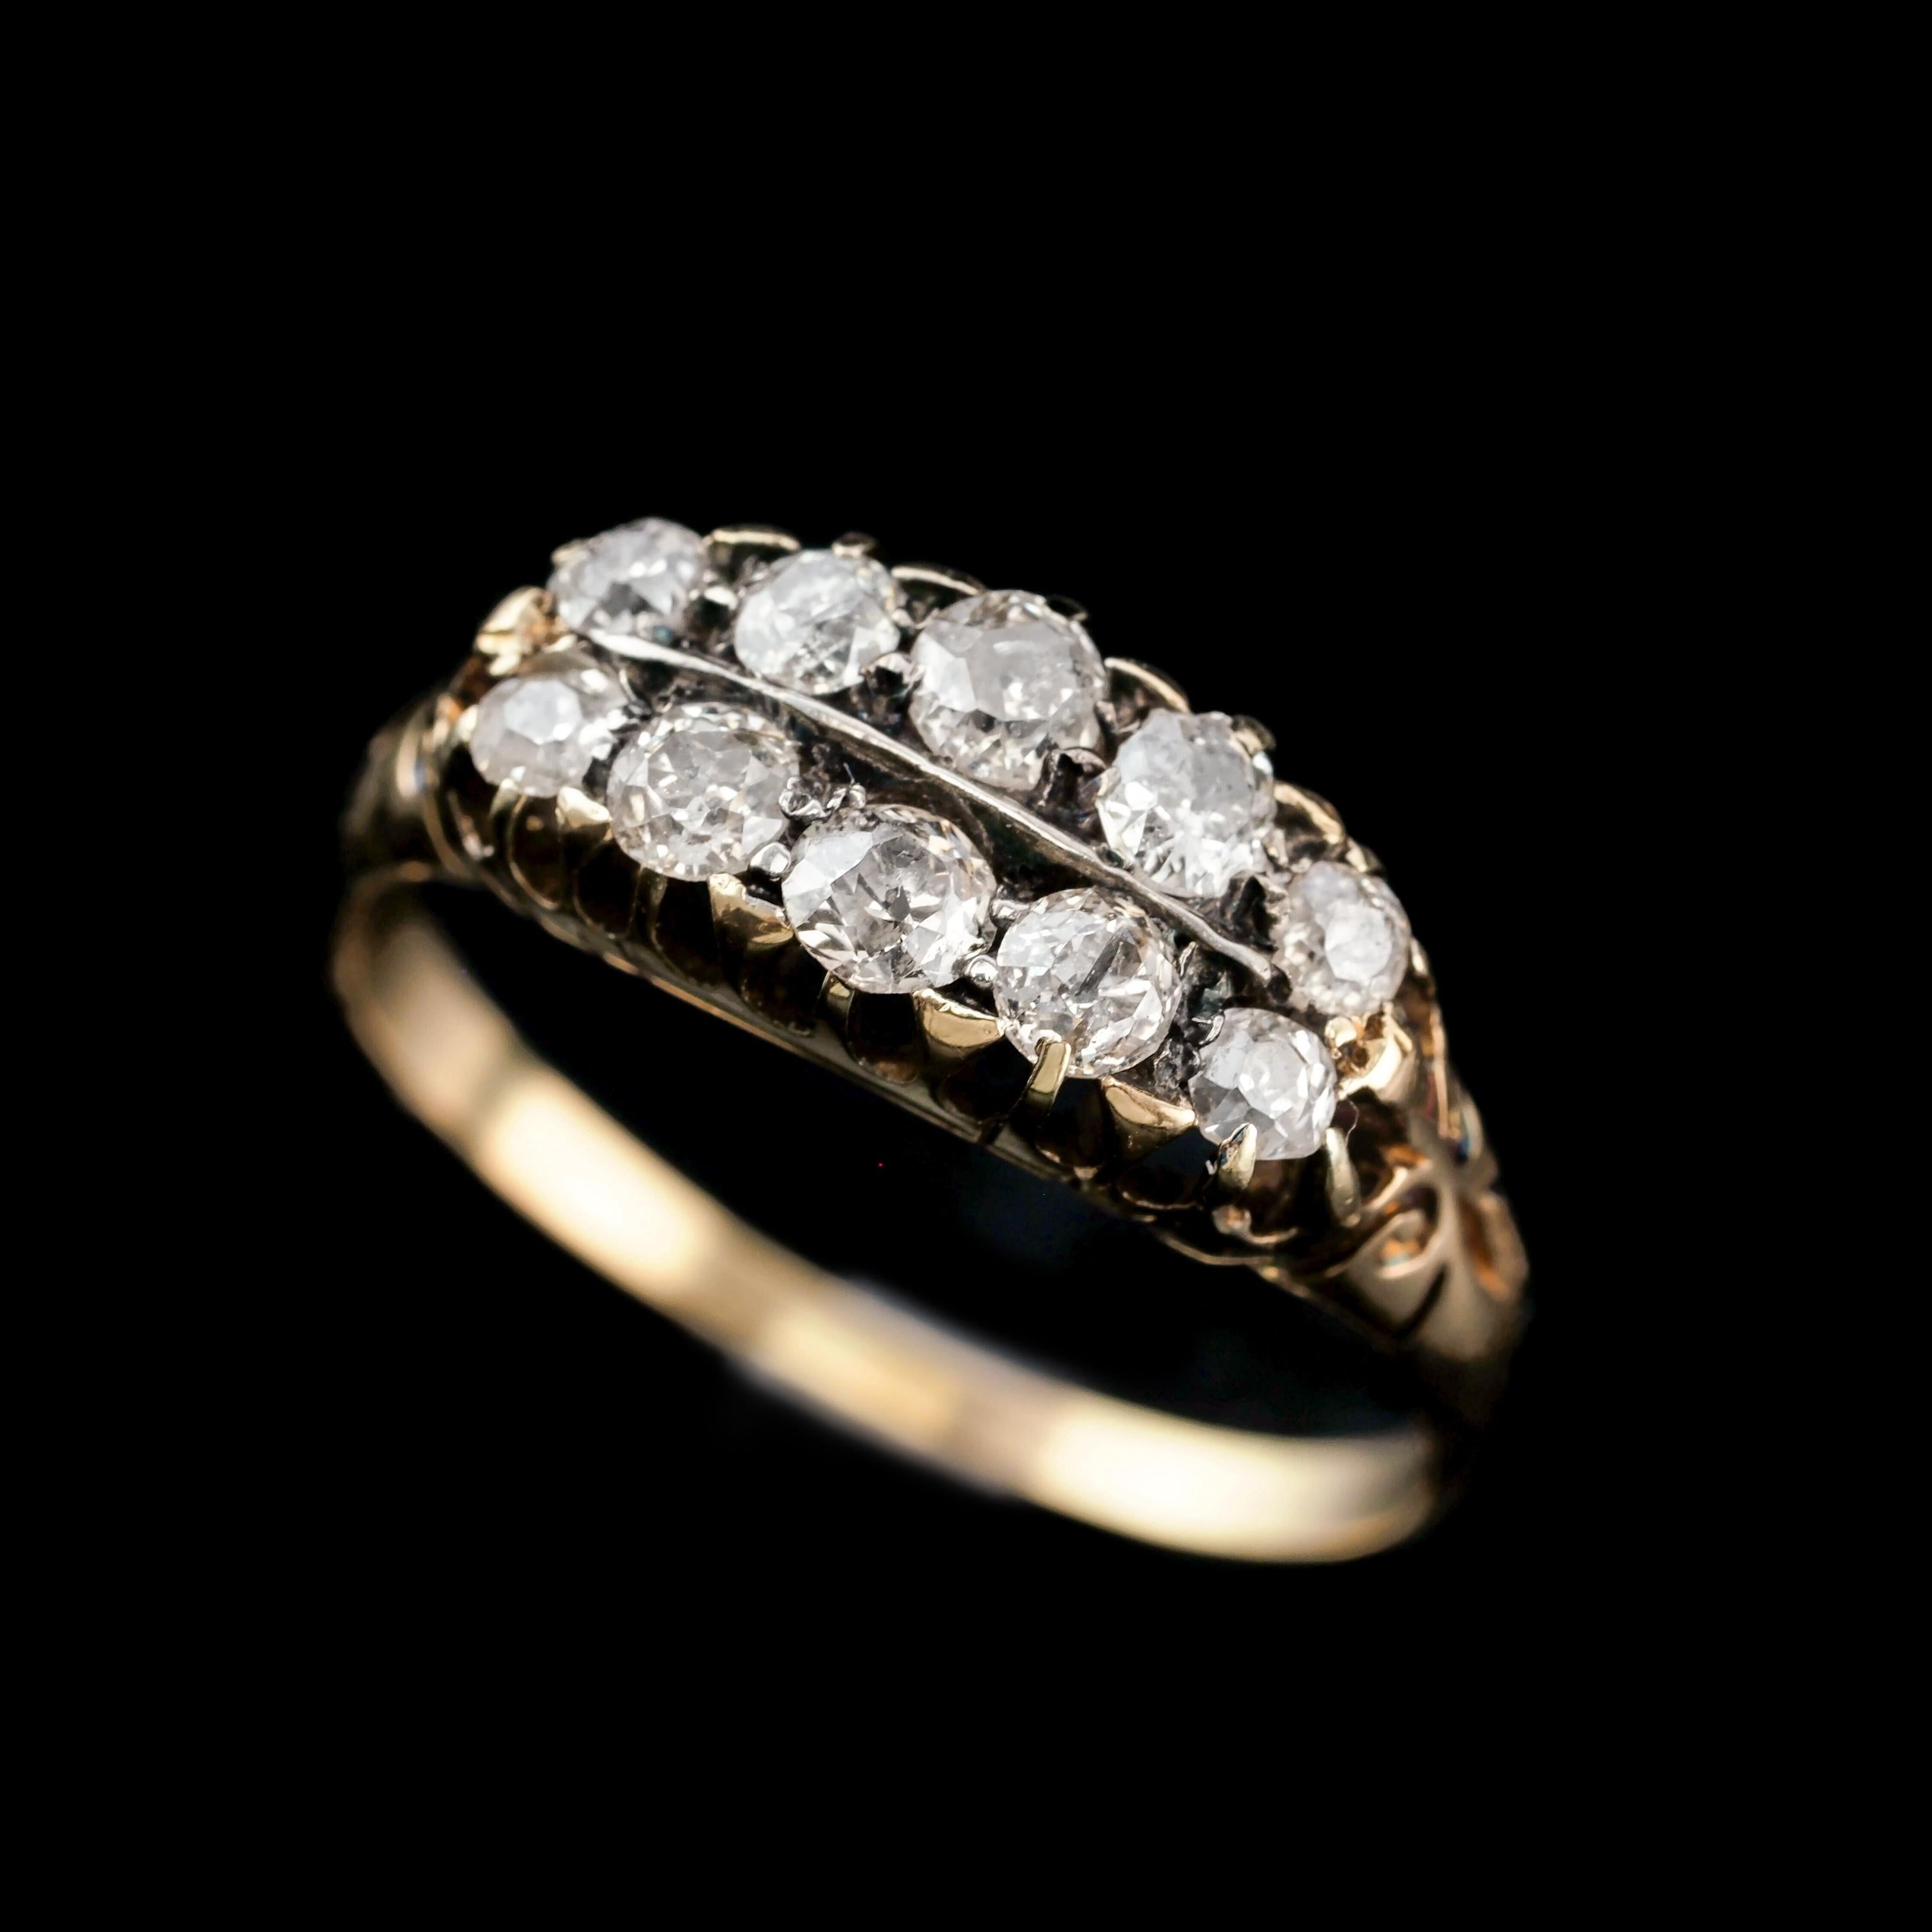 Antique Victorian 18K Gold Diamond Ring Old Cut - Boat Shaped c.1890 For Sale 10